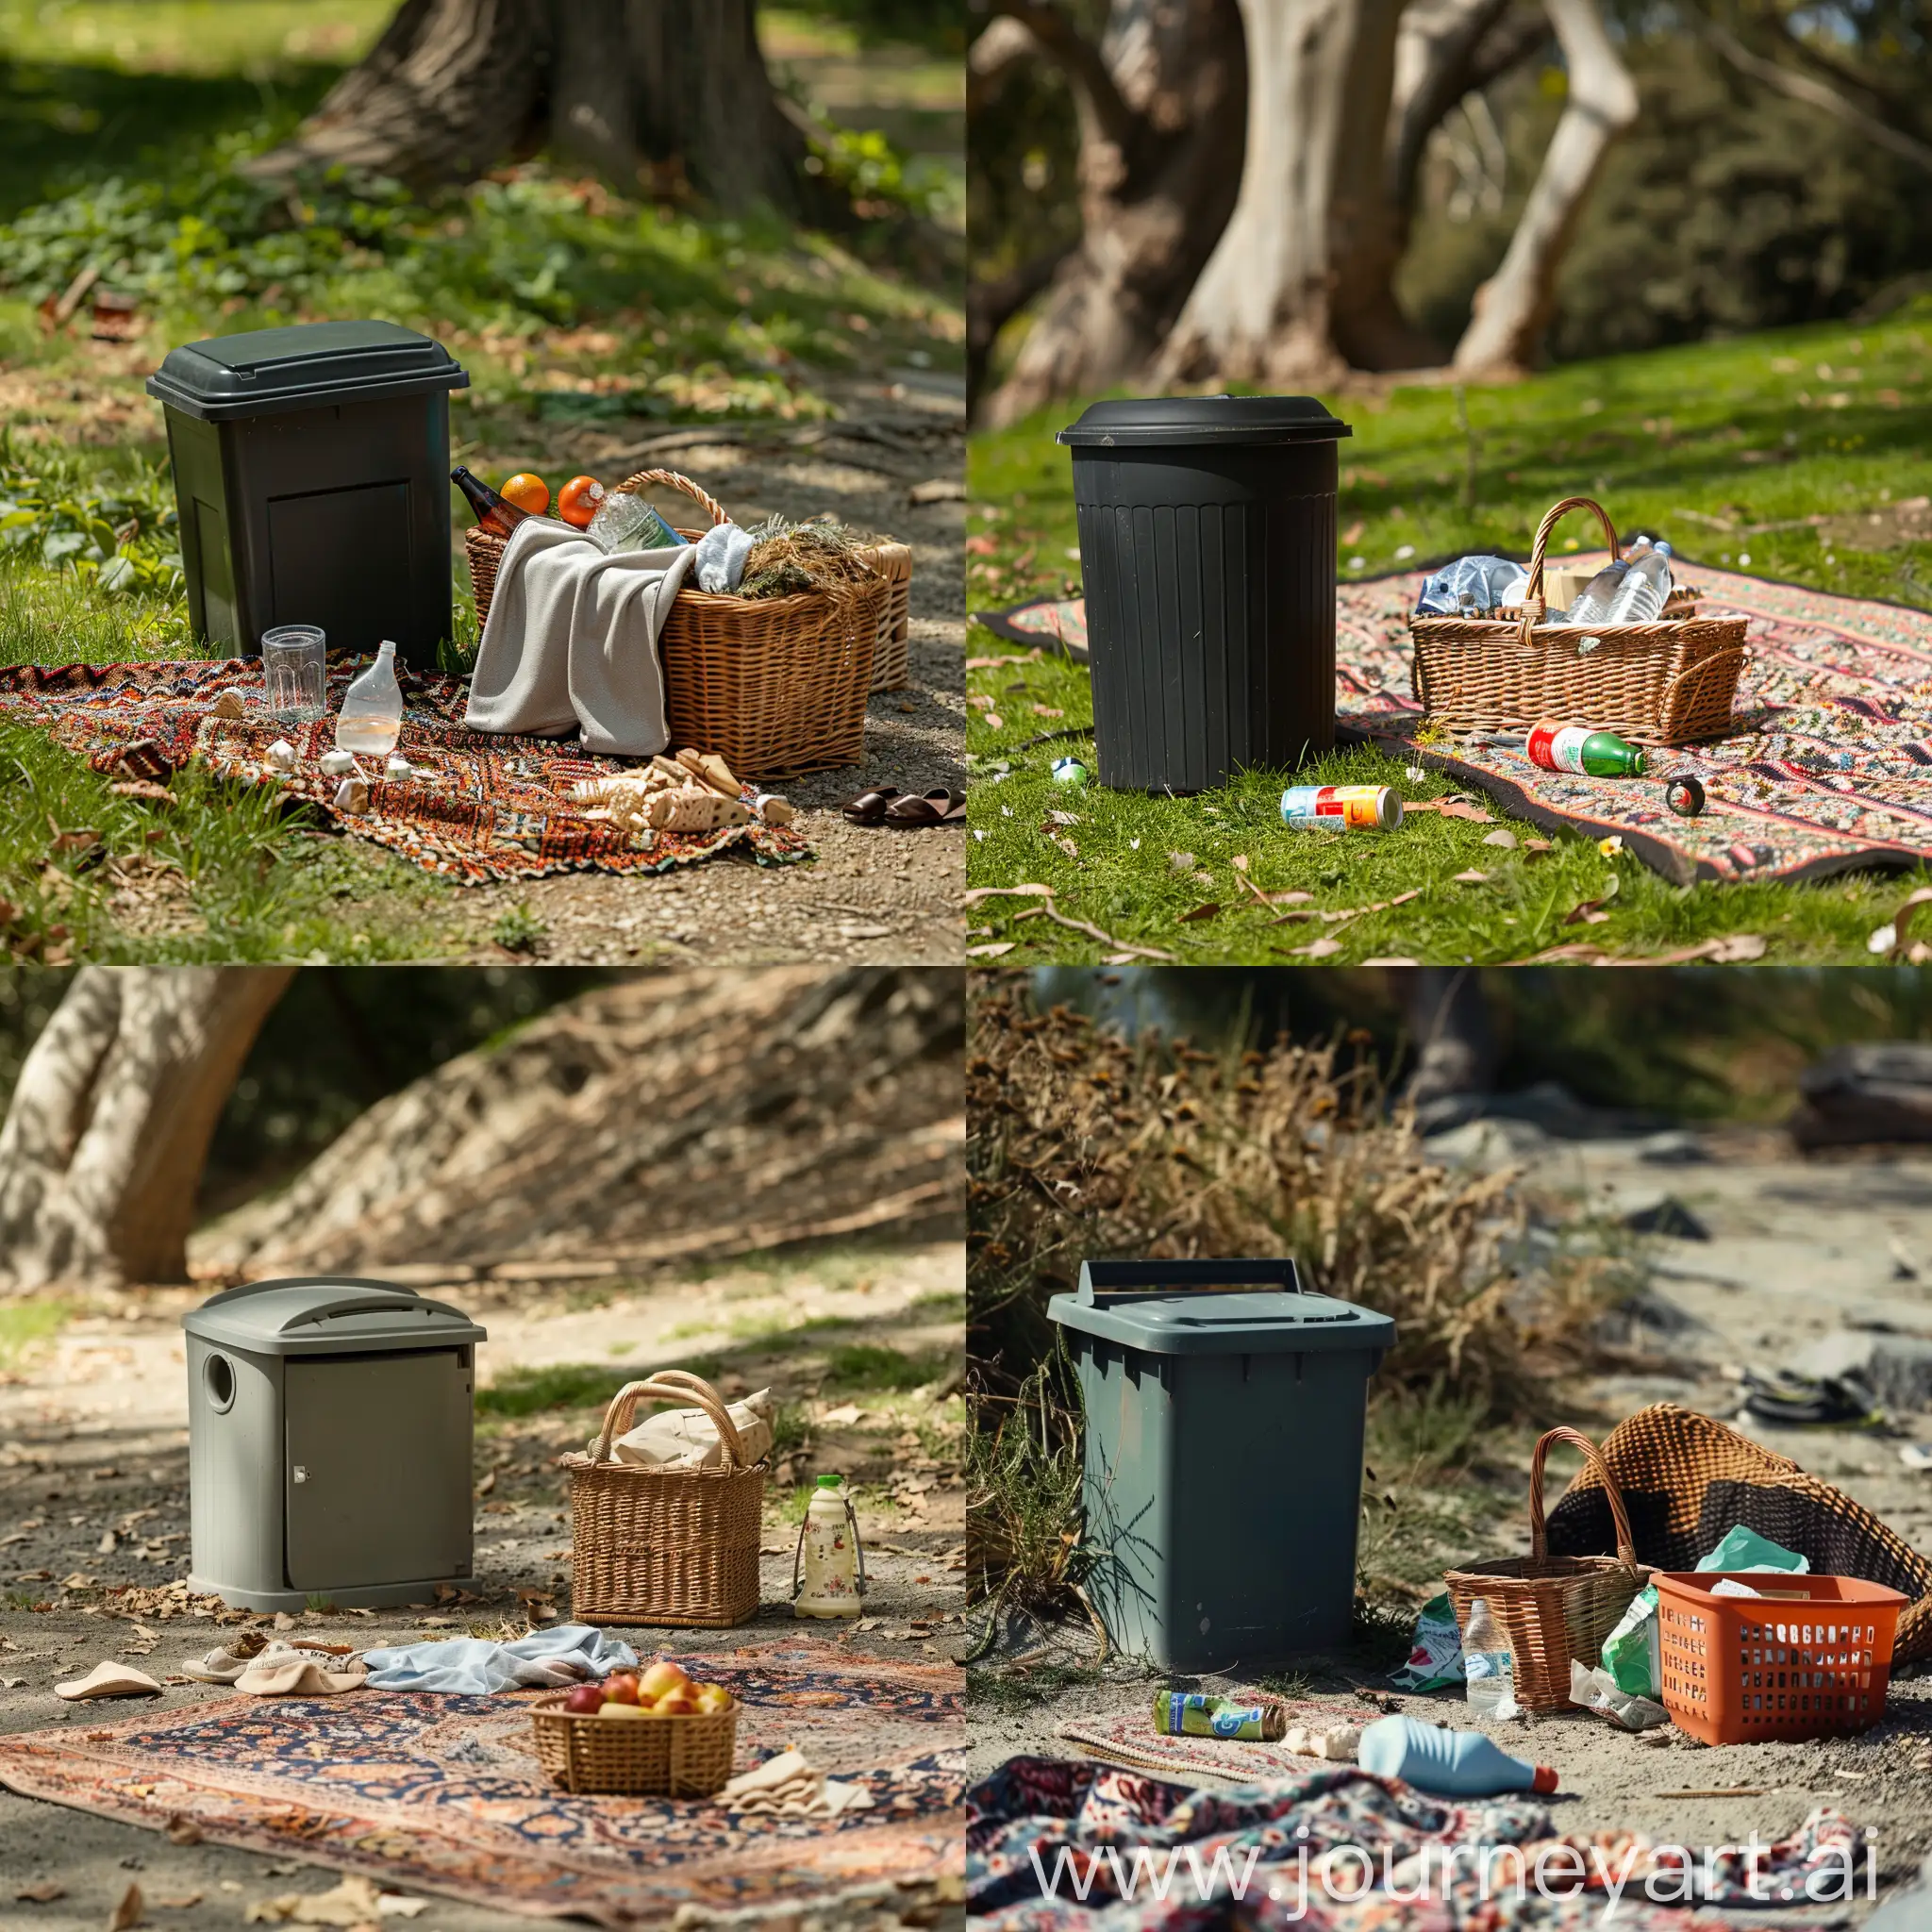 Scattered-Garbage-Near-Picnic-Area